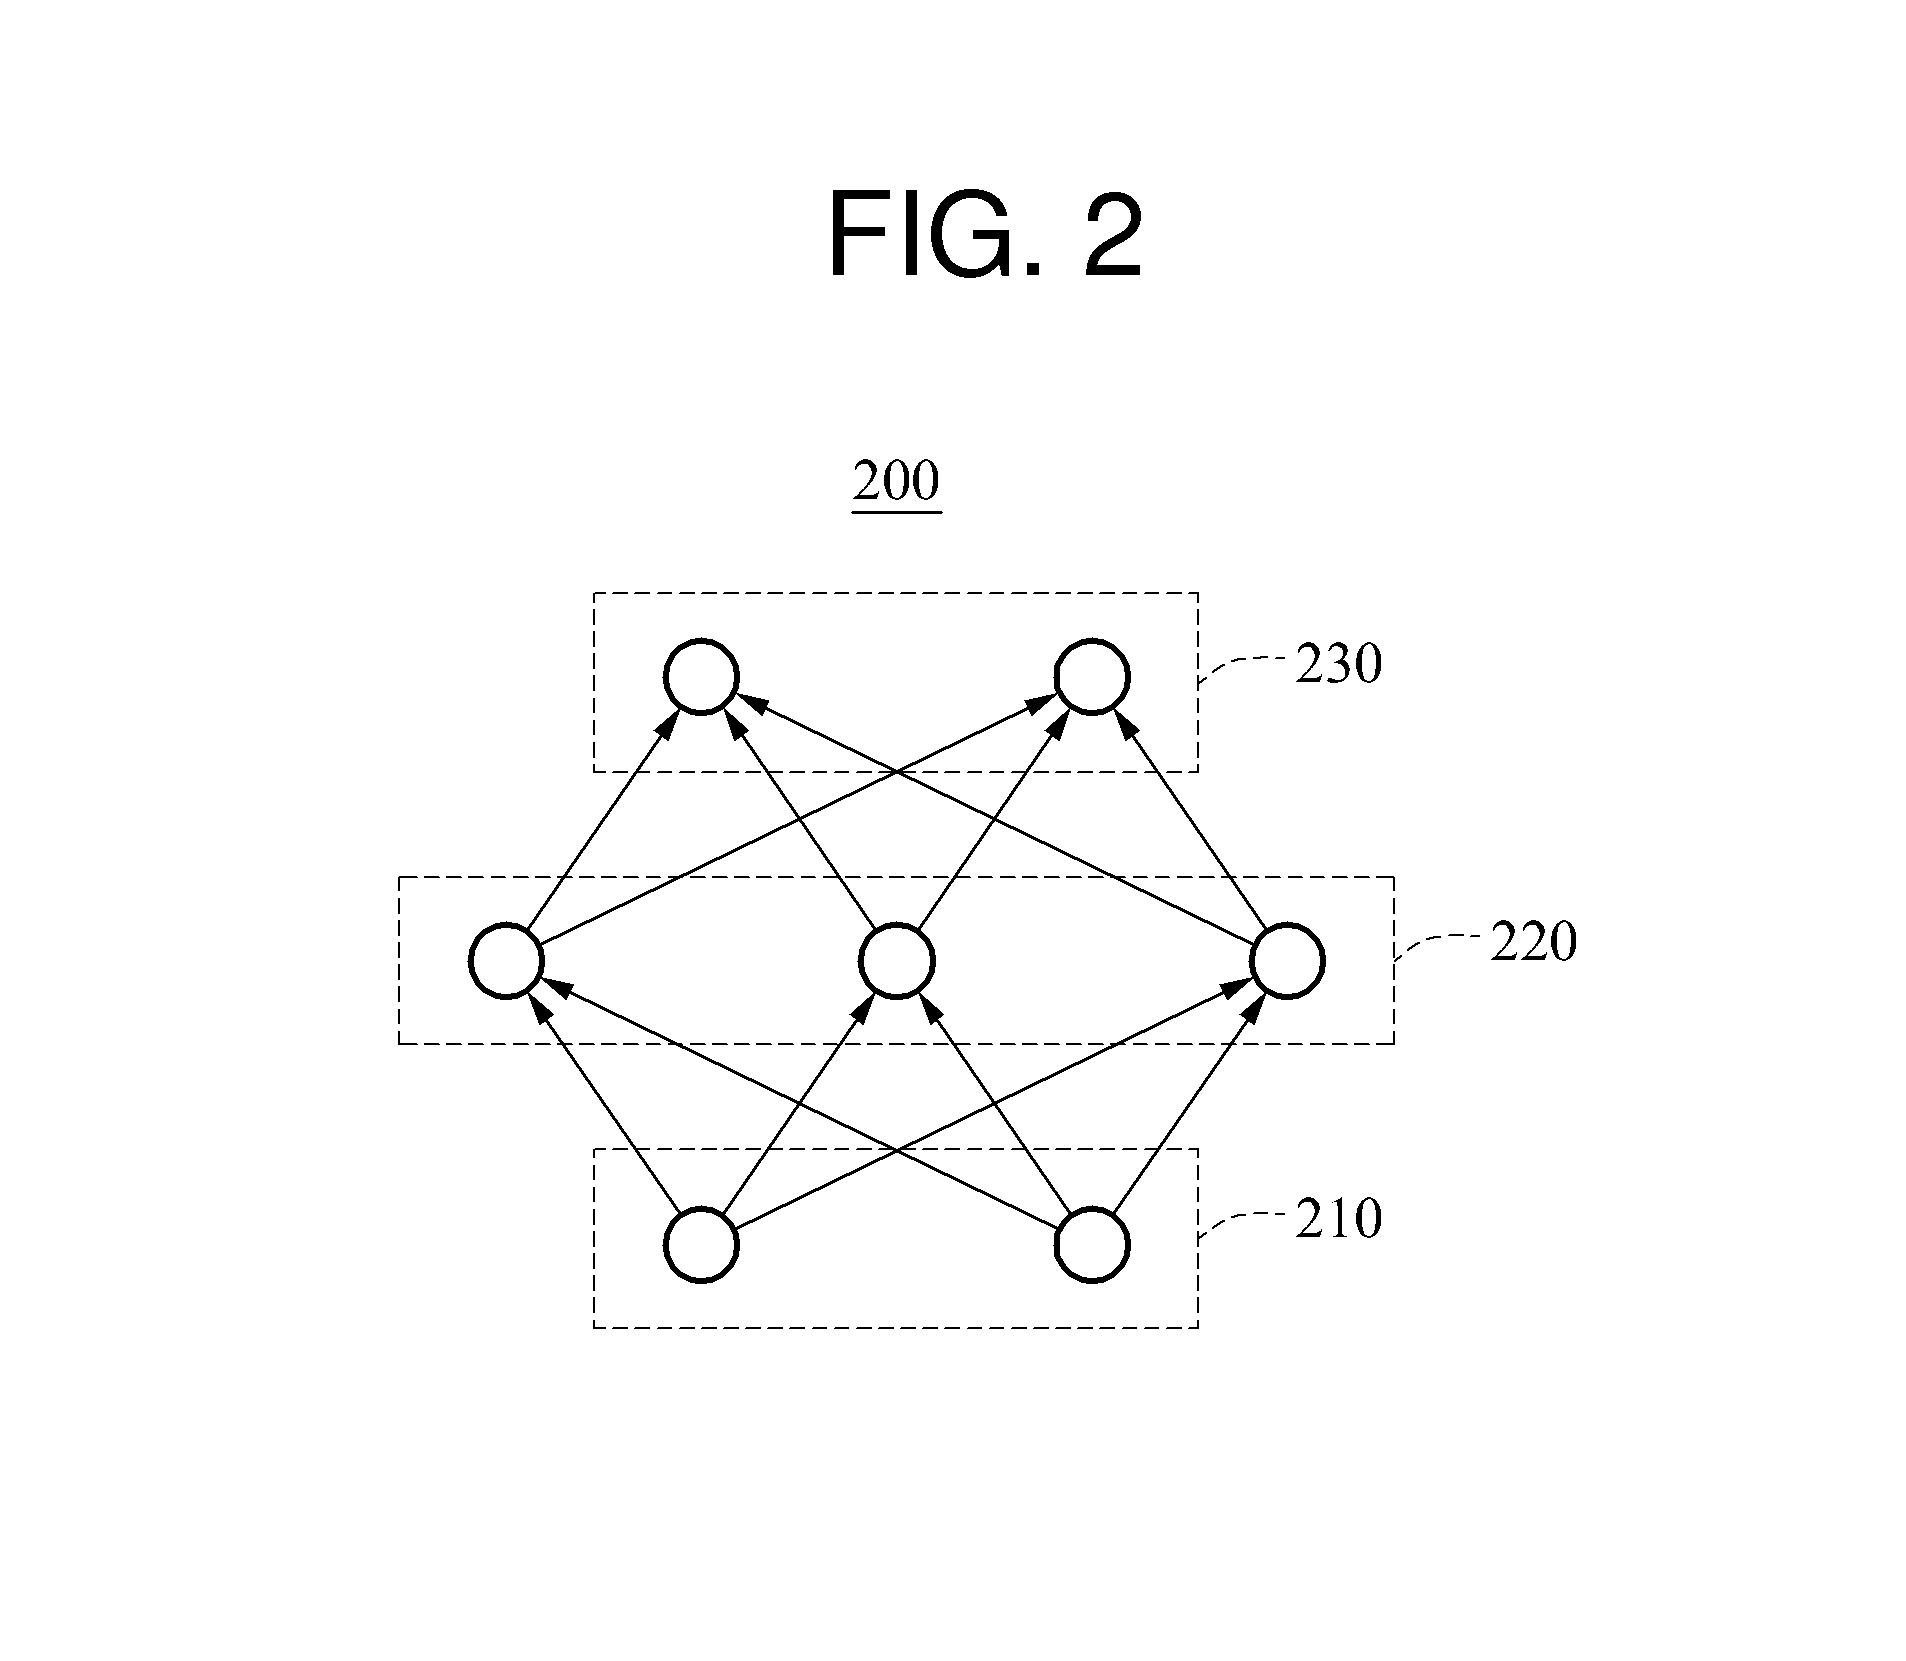 Method and apparatus for speech recognition